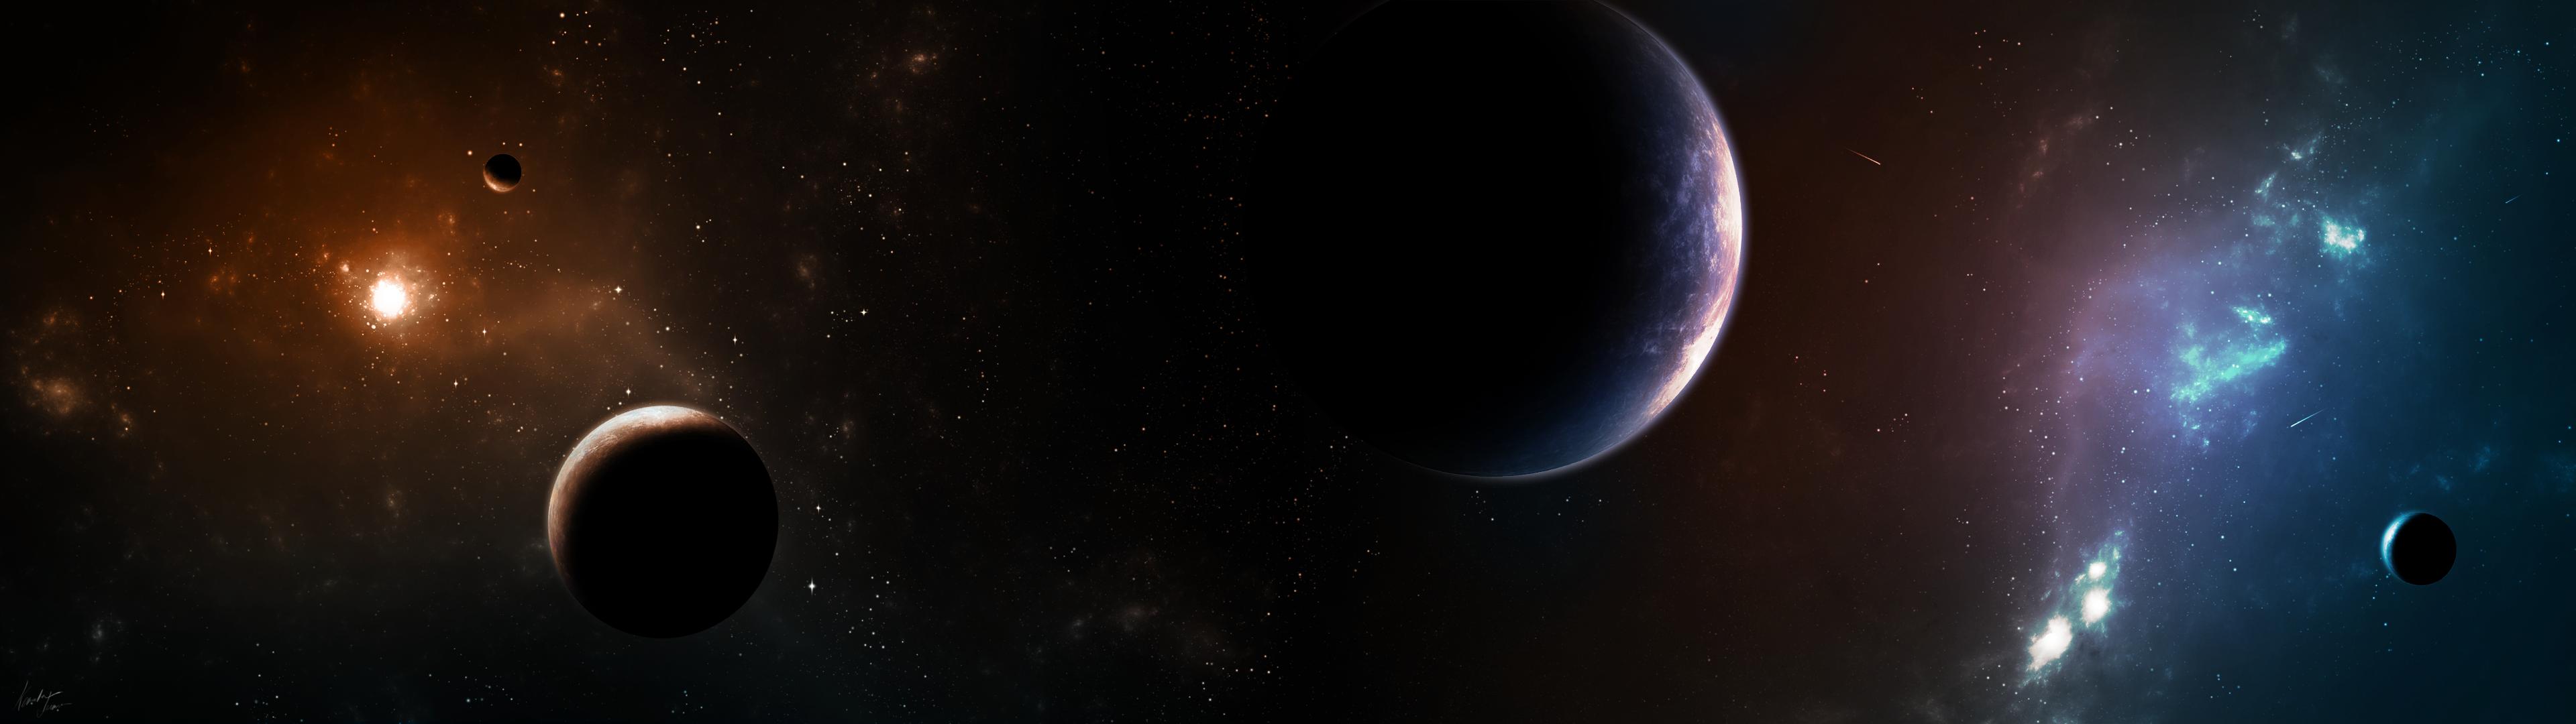 Wallpaper Mostly Space Themed